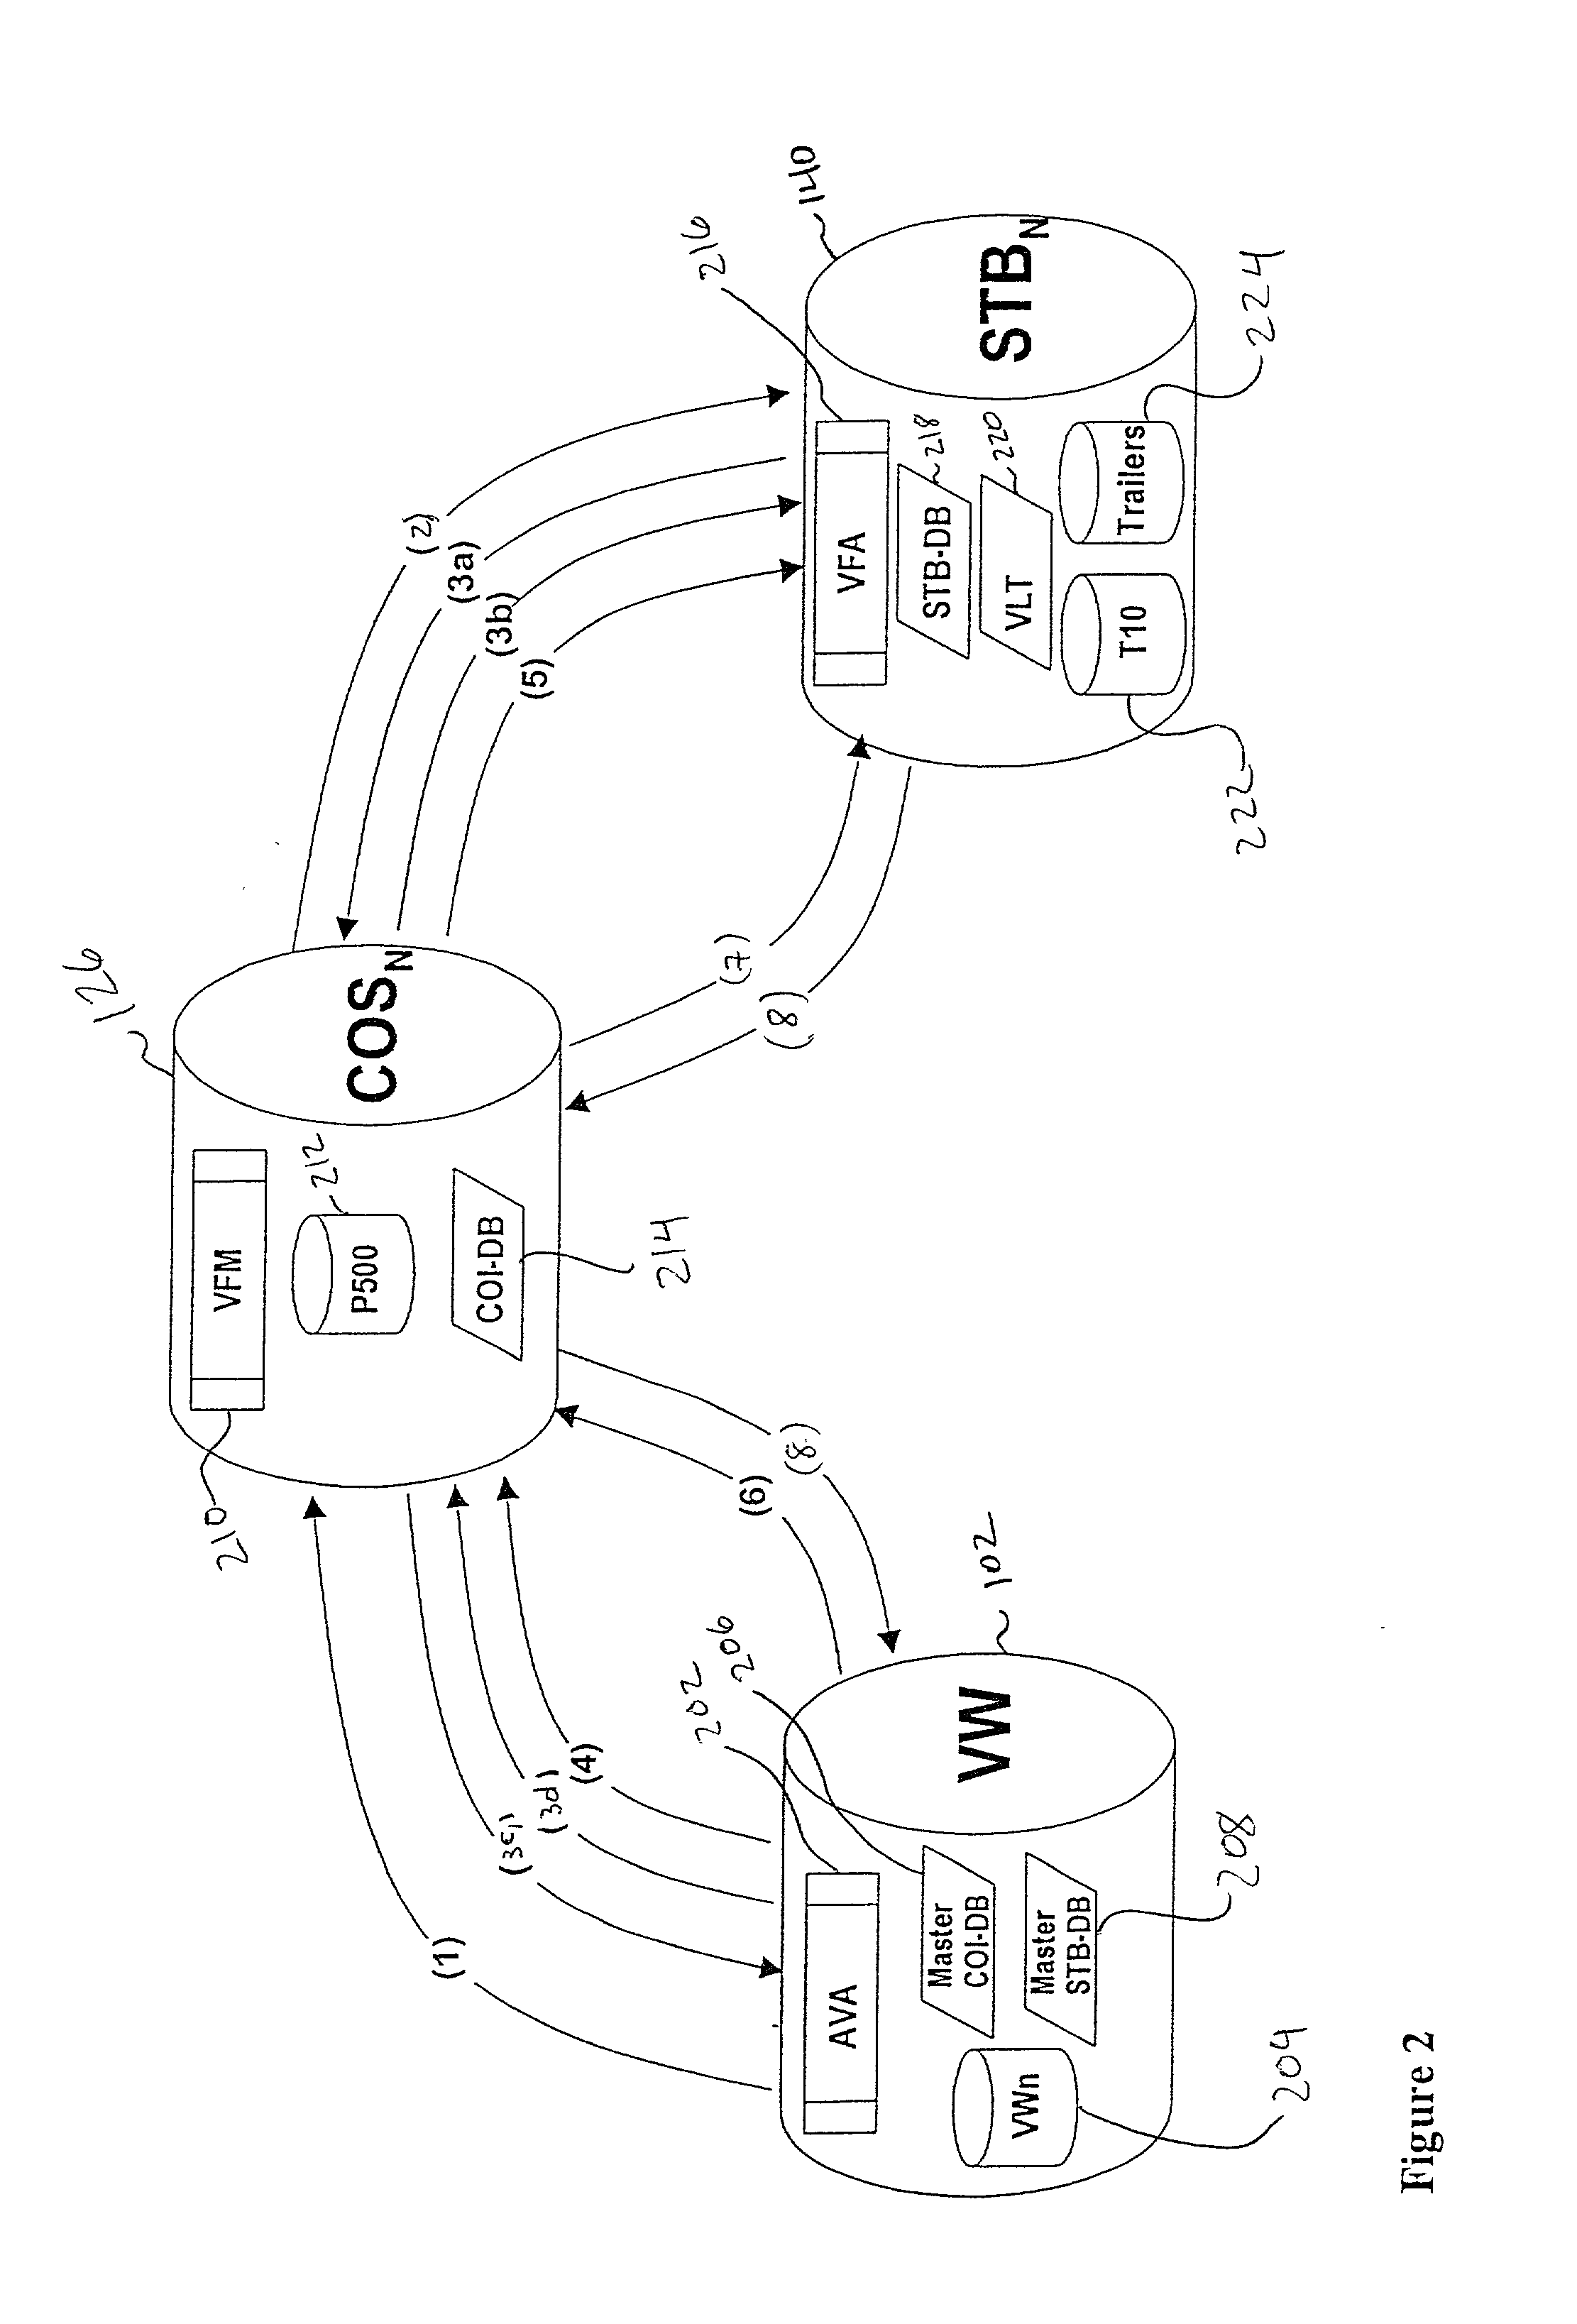 Adaptive video on-demand system and method using tempo-differential file transfer